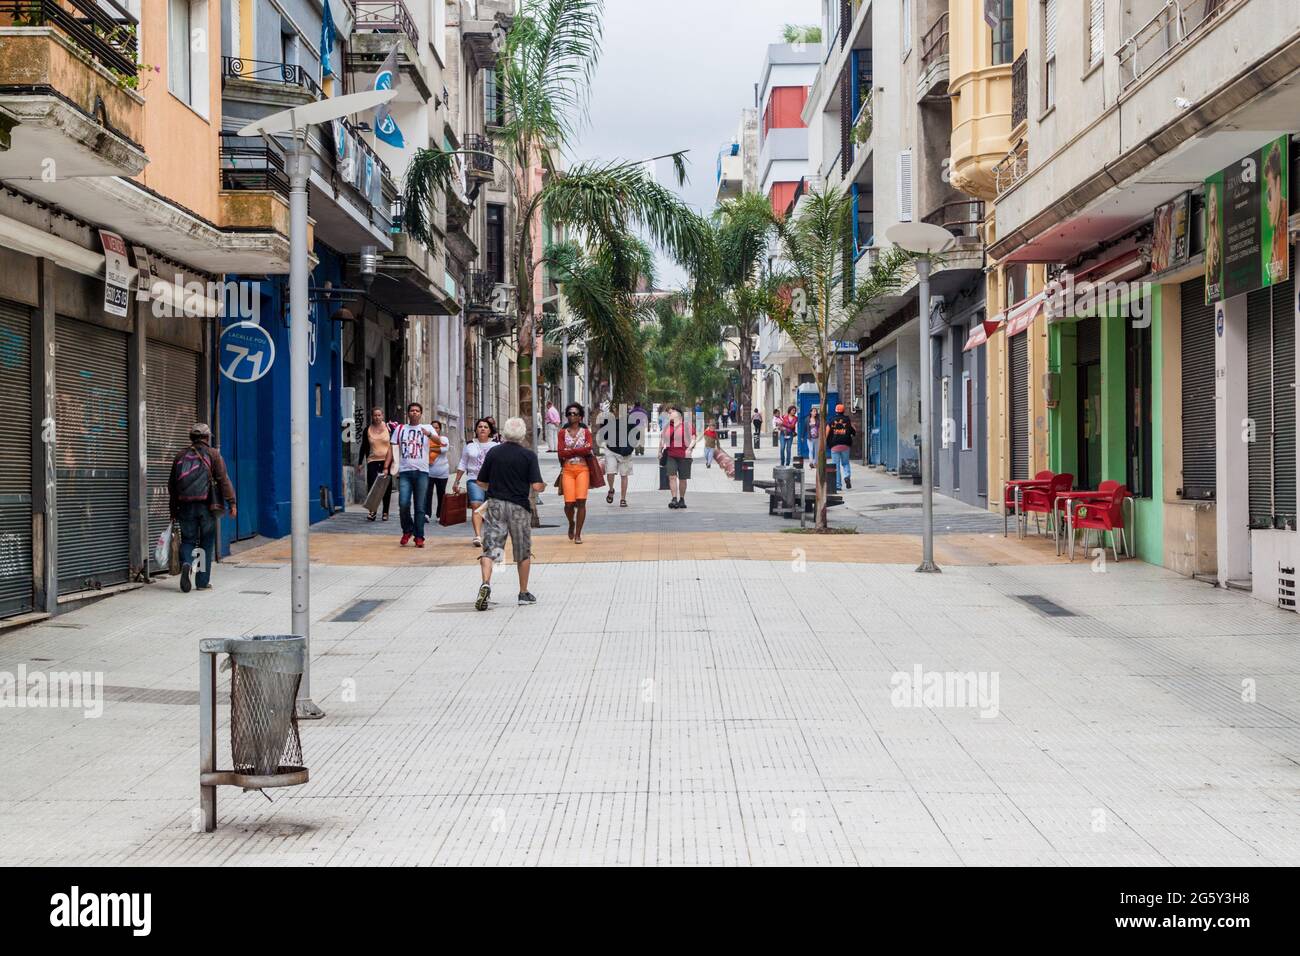 MONTEVIDEO, URUGUAY - FEB 19, 2015: View of a street in the center of Montevideo. Stock Photo